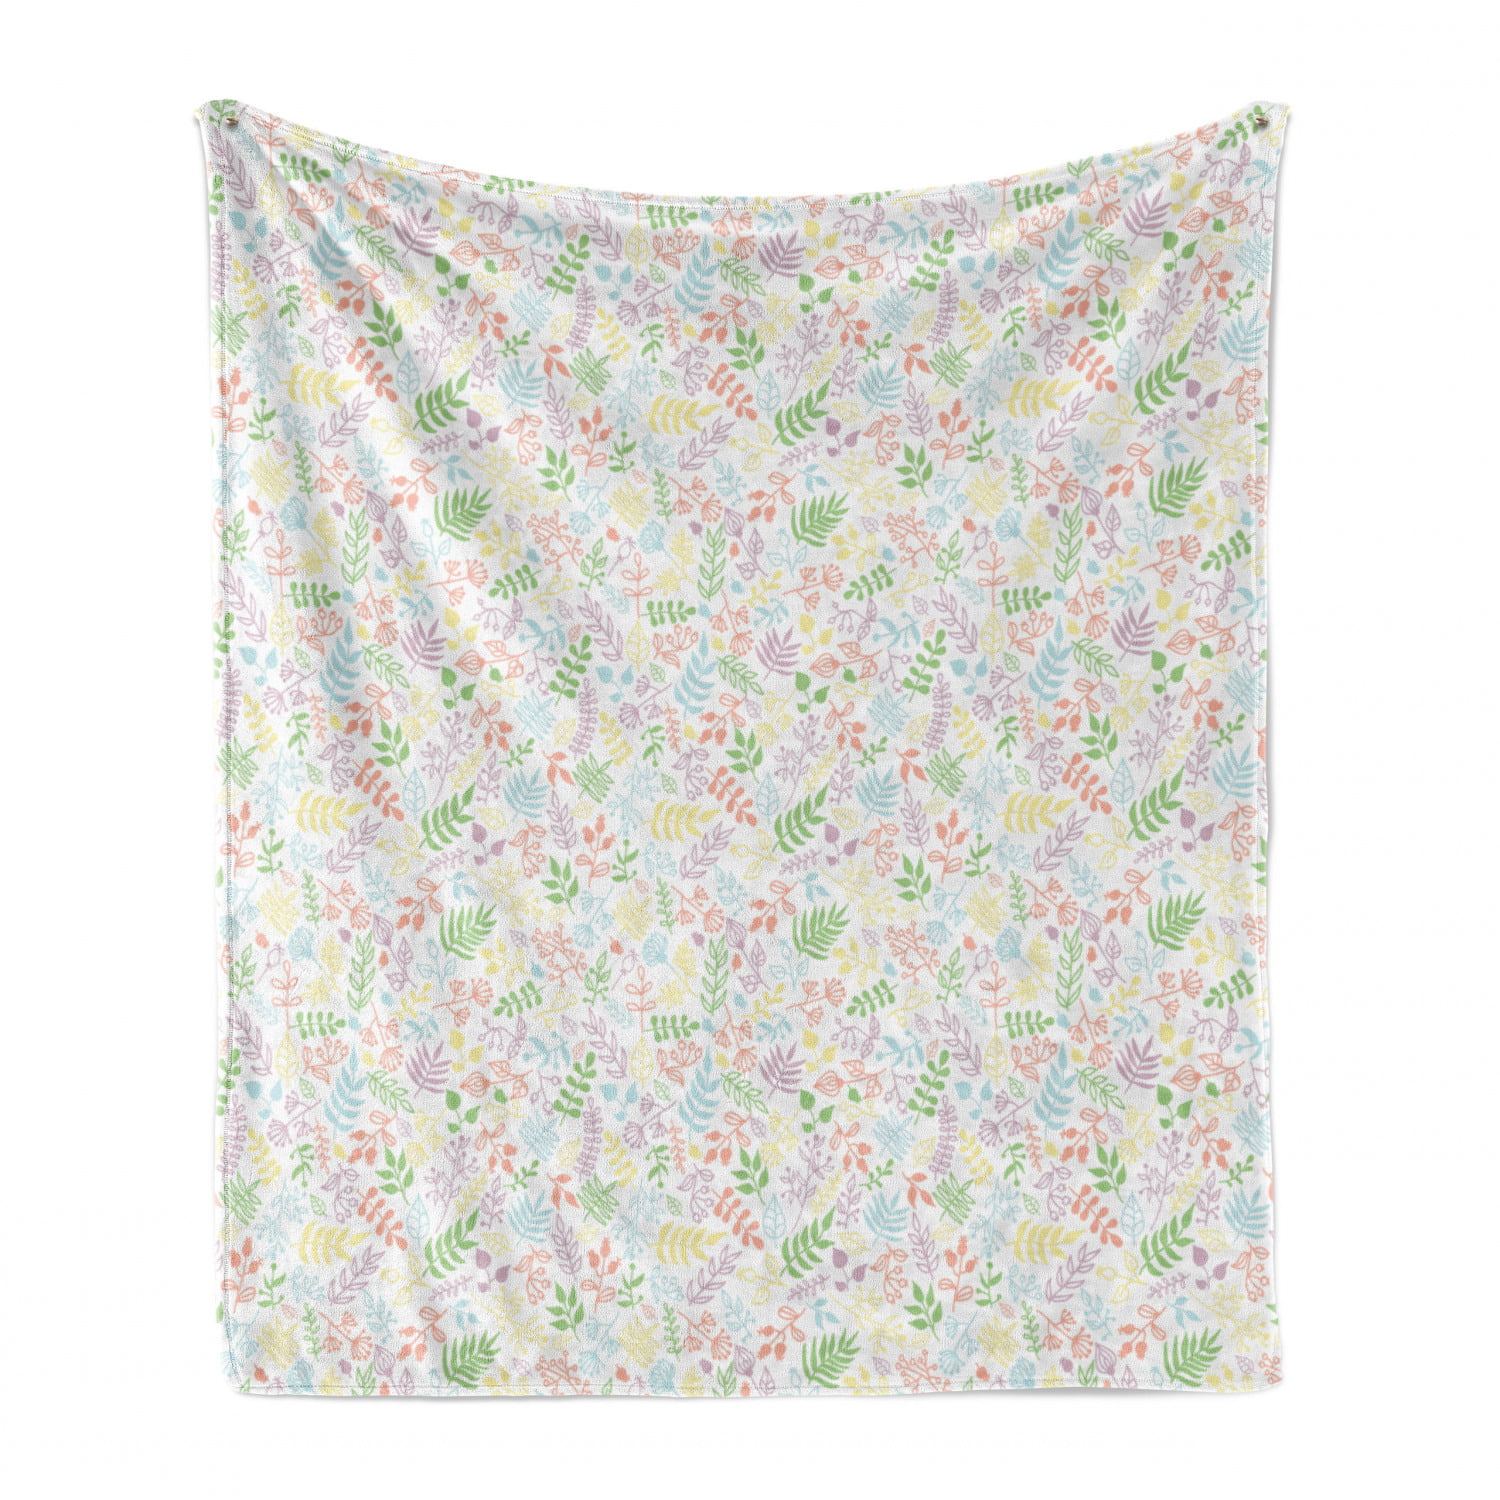 Cozy Plush for Indoor and Outdoor Use 60 x 80 Peonies Peas Roses Bouquet Butterflies Pastel Tones Bridal Theme Pale Pink Green Ambesonne Shabby Flora Soft Flannel Fleece Throw Blanket 